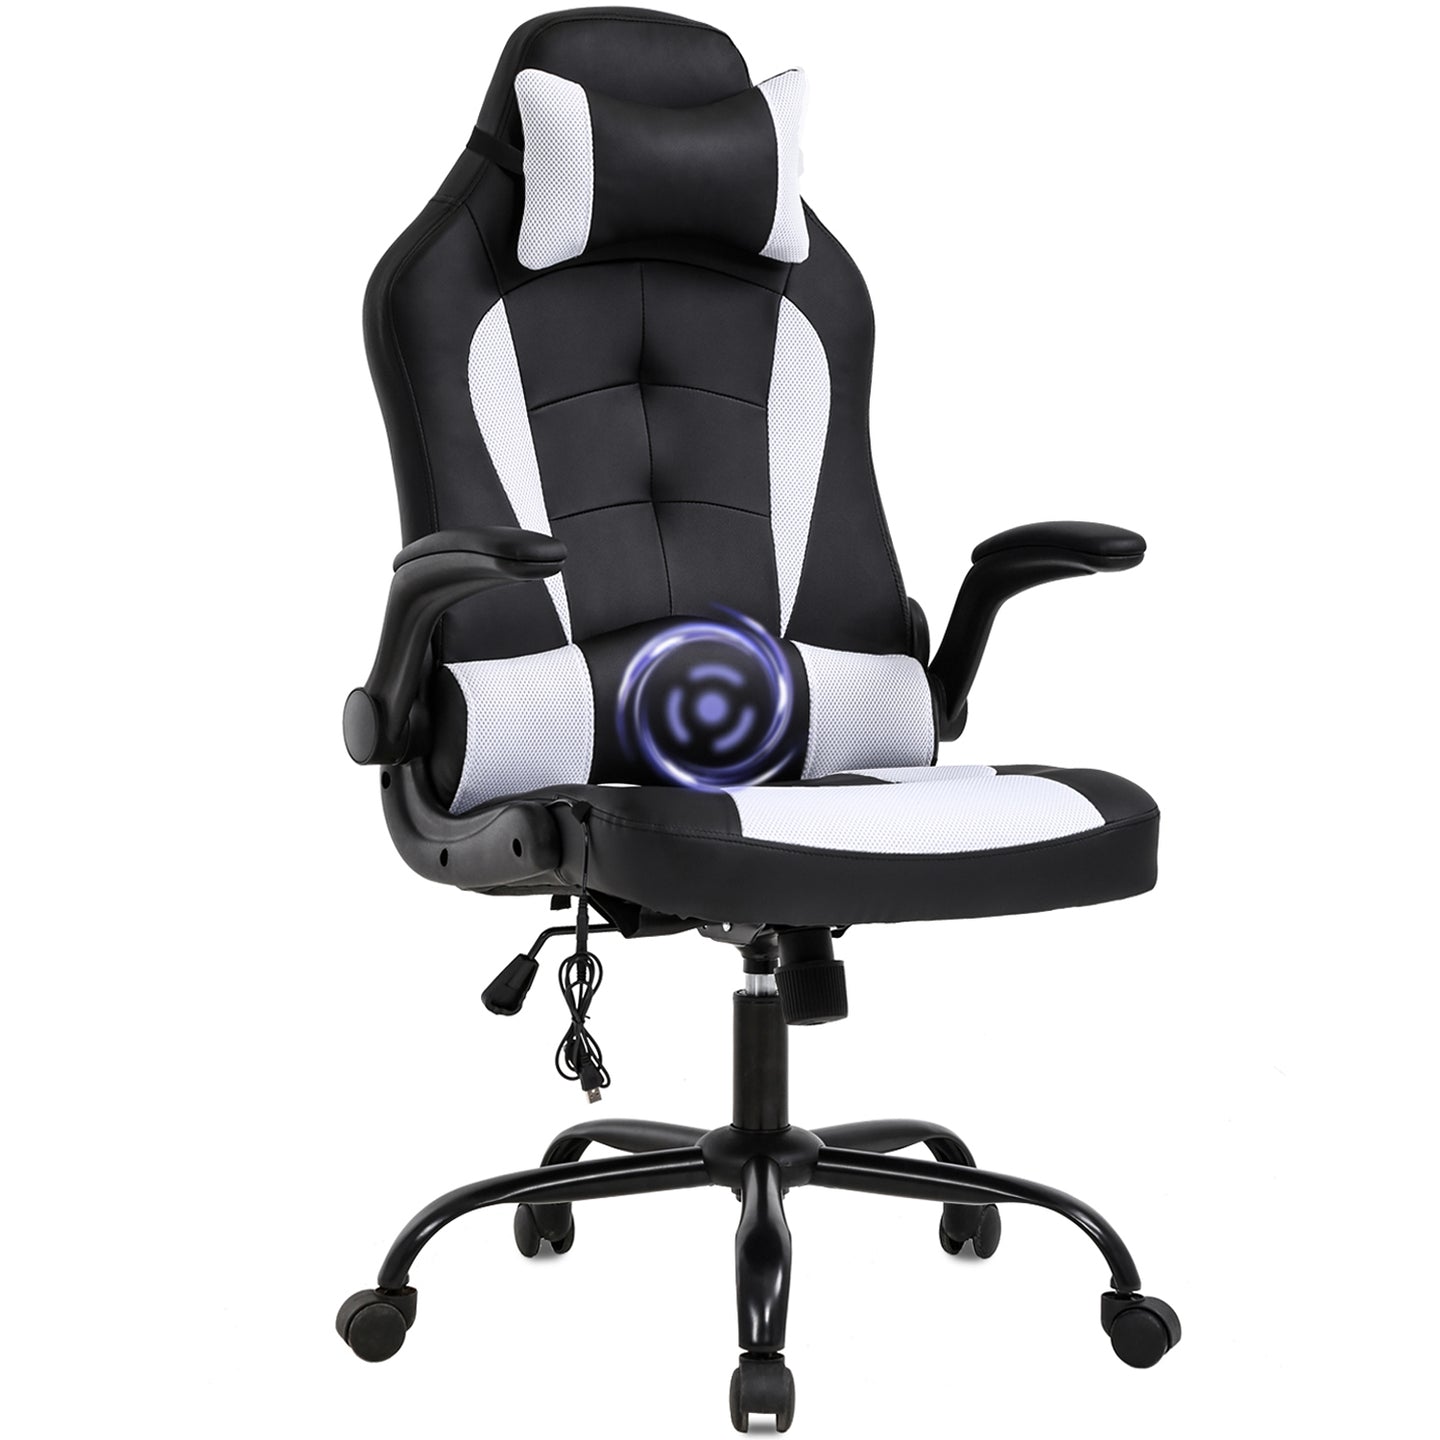 PC Gaming Chair Massage Office Chair Ergonomic Desk Chair Racing Executive PU Leather Computer Chair with Lumbar Support Headrest Armrest Task Rolling Swivel Chair for Women Adults, White 7544